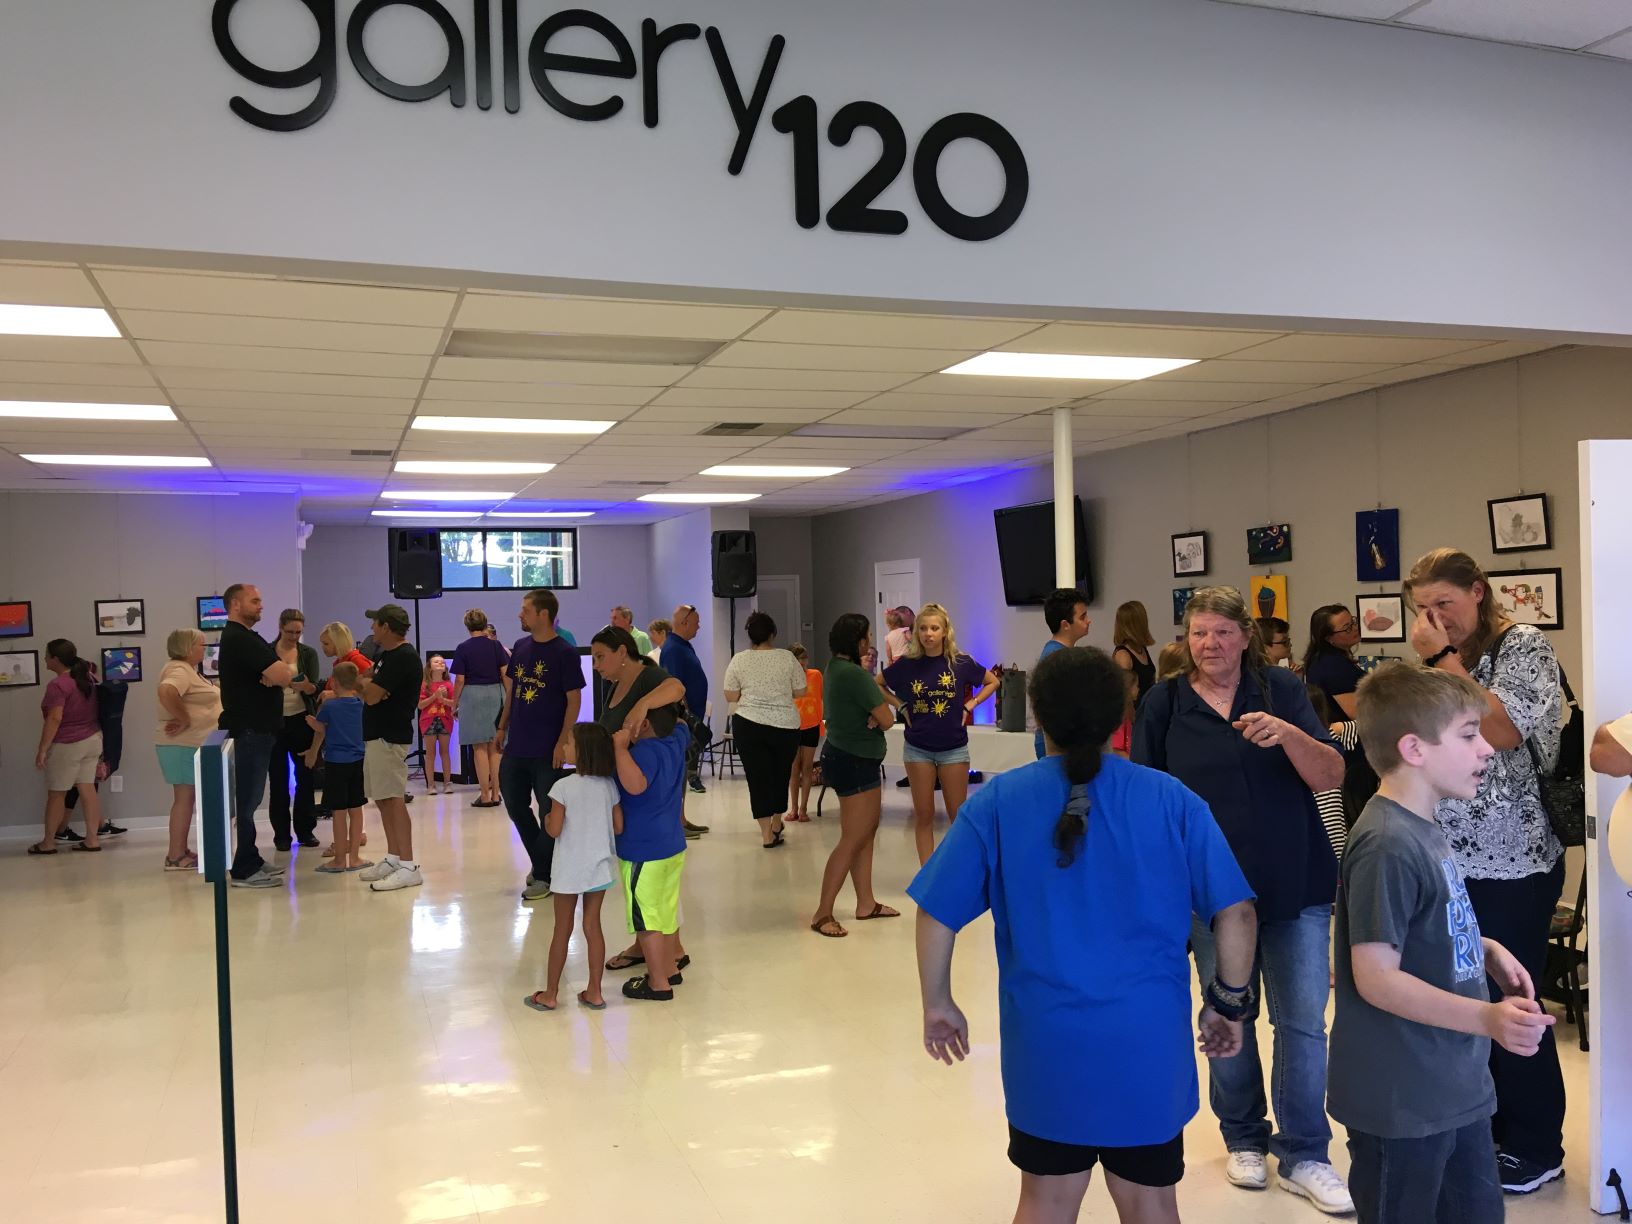 Gallery 120 in the Town of Clover